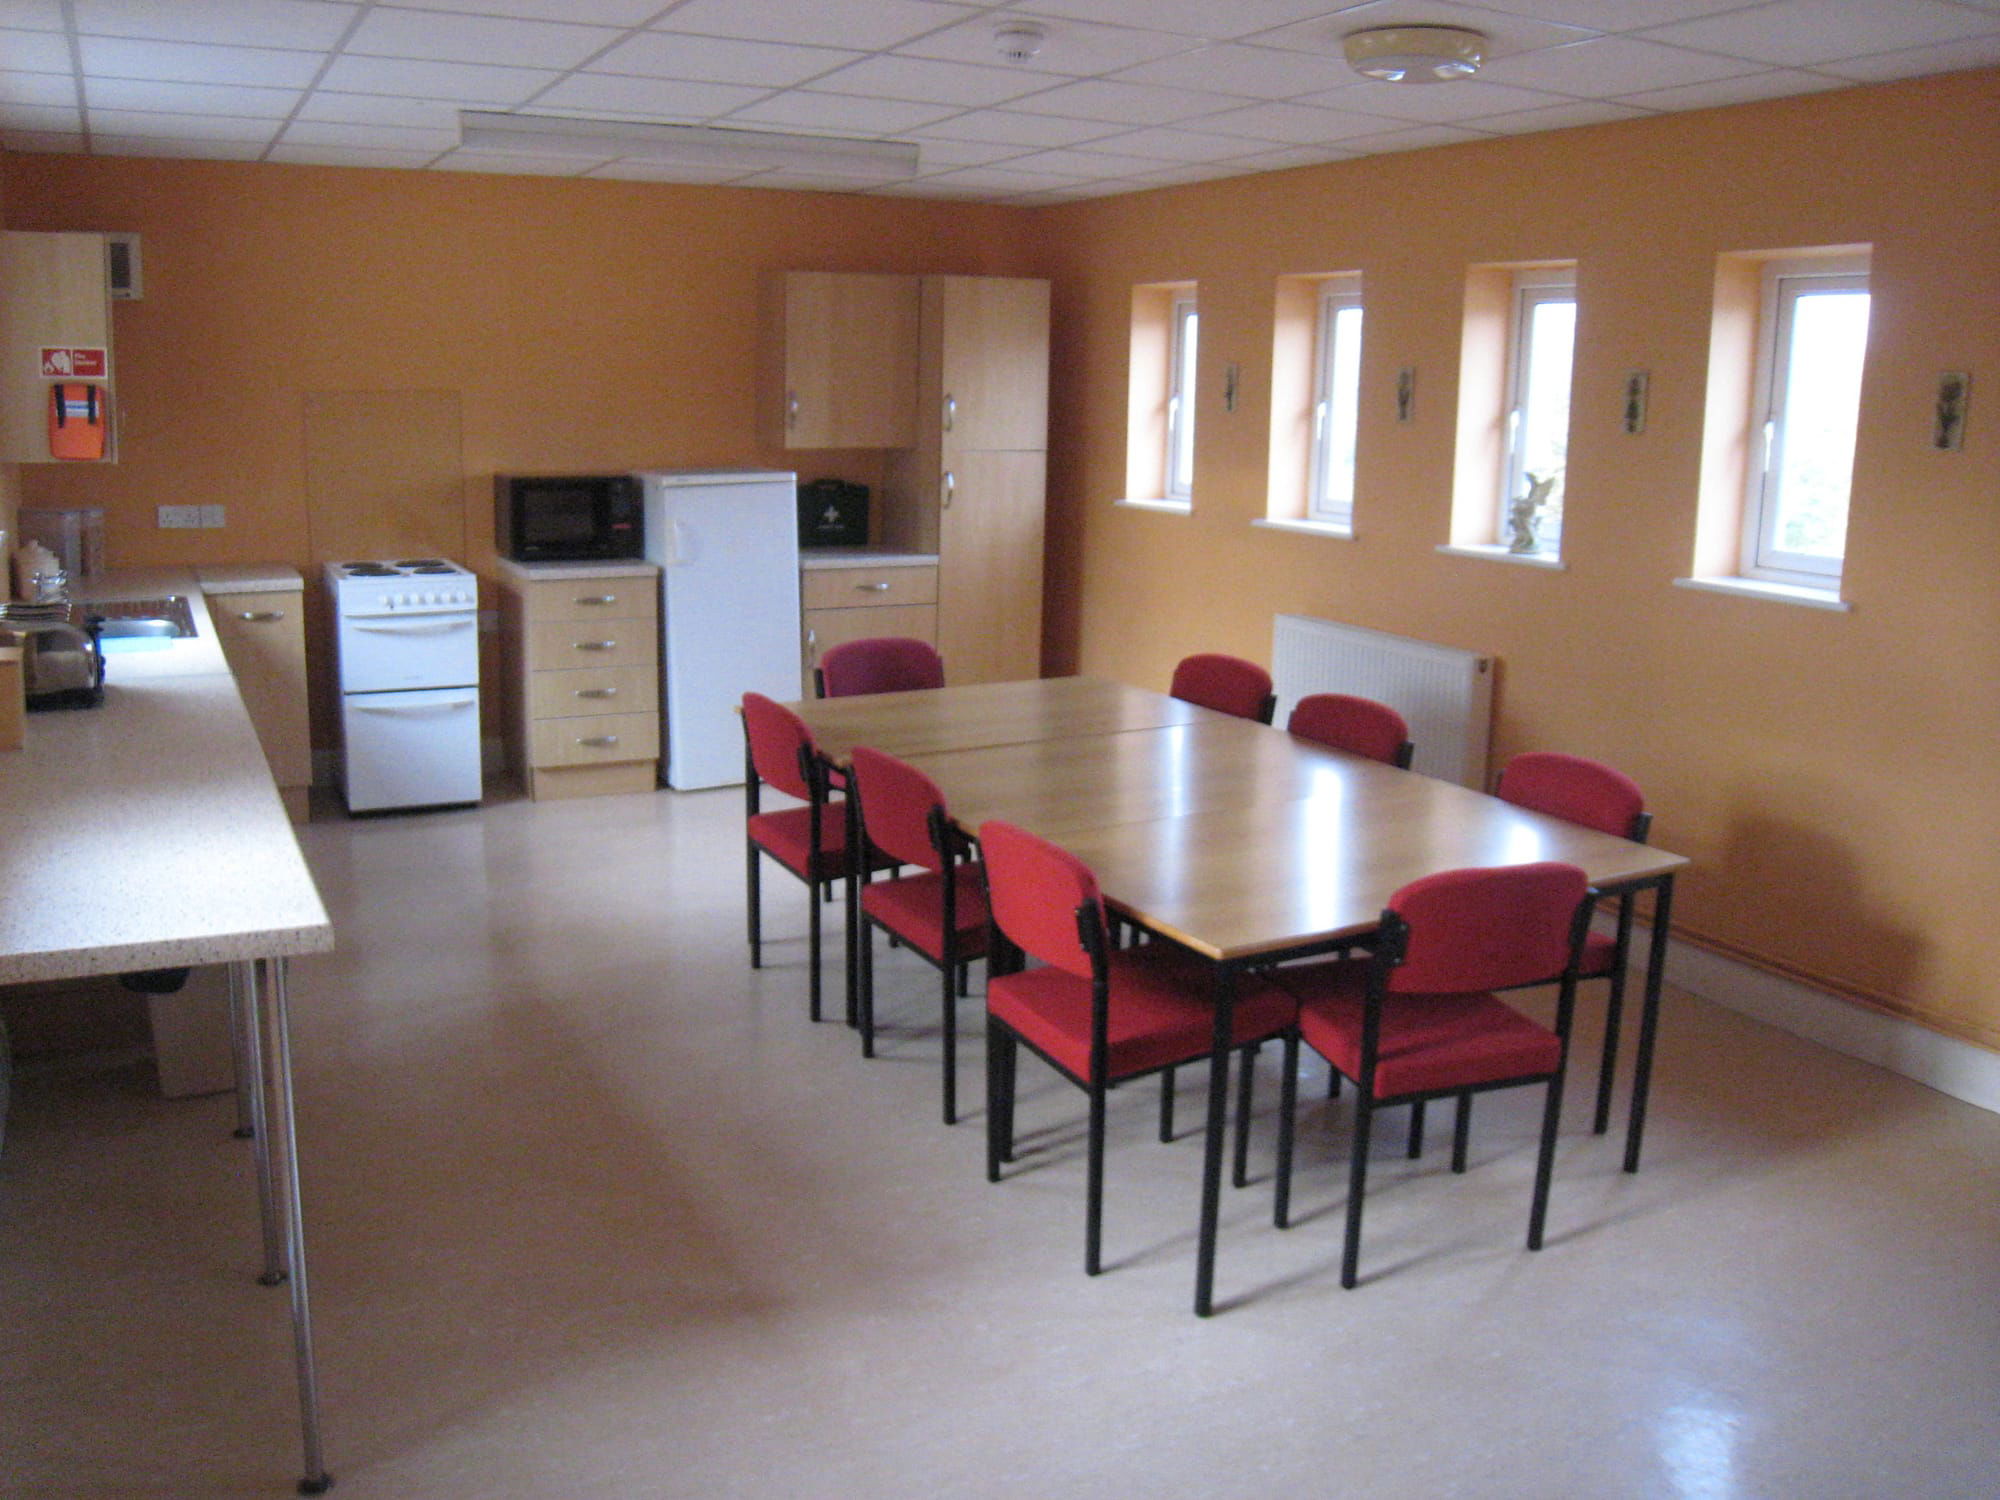 Kitchen and meeting room on every floor